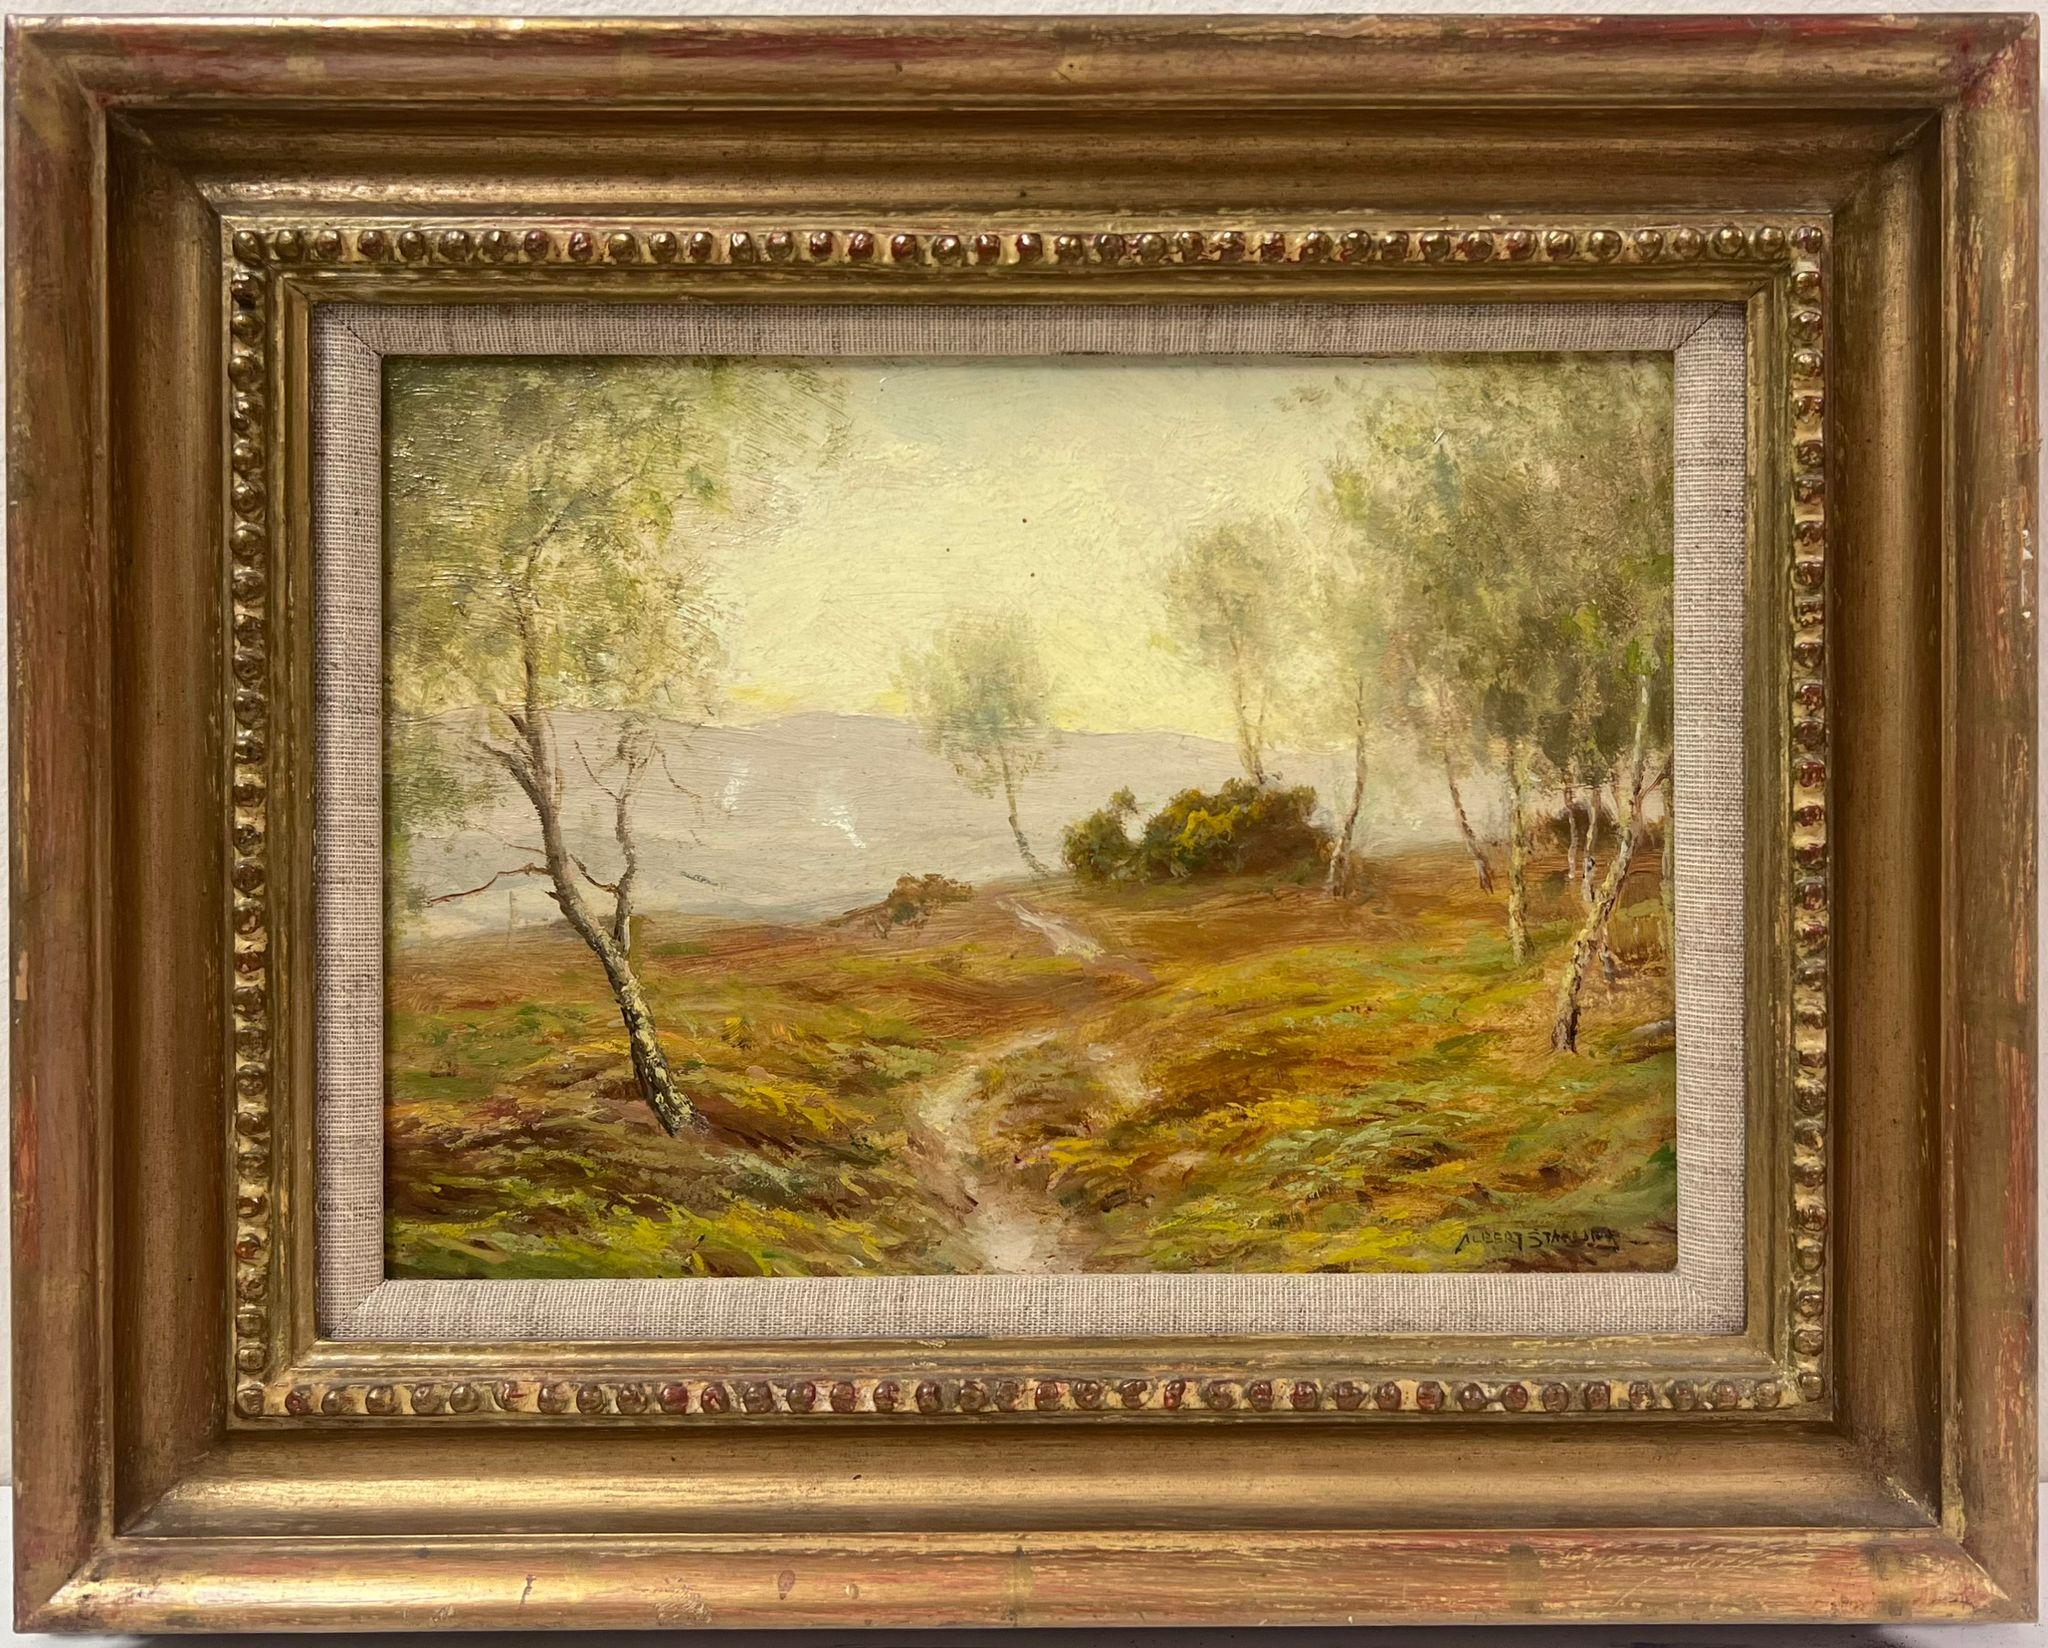 Golden Light in the English Countryside
early 20th century, signed Albert Stanley?
oil on board, framed
framed: 11 x 14 inches
board : 8 x 10.5 inches
provenance: private collection, UK
condition: very good and sound condition 